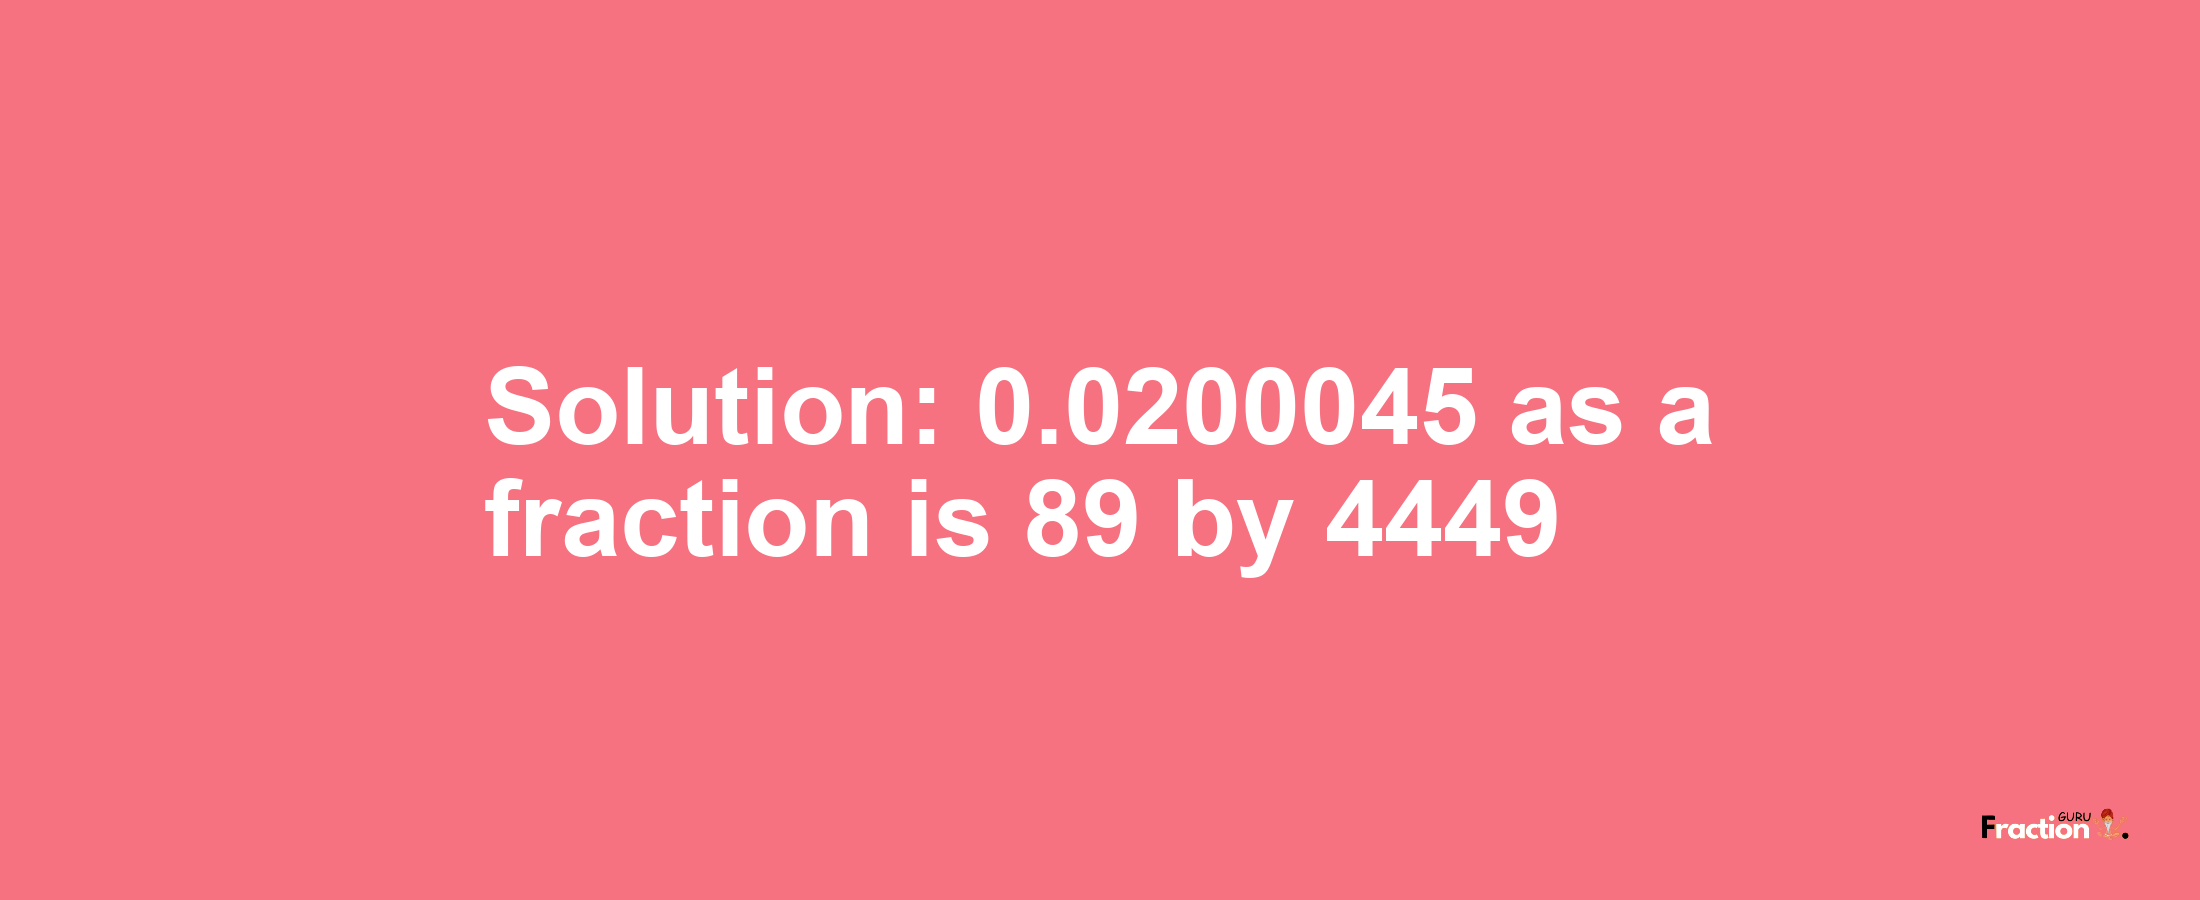 Solution:0.0200045 as a fraction is 89/4449